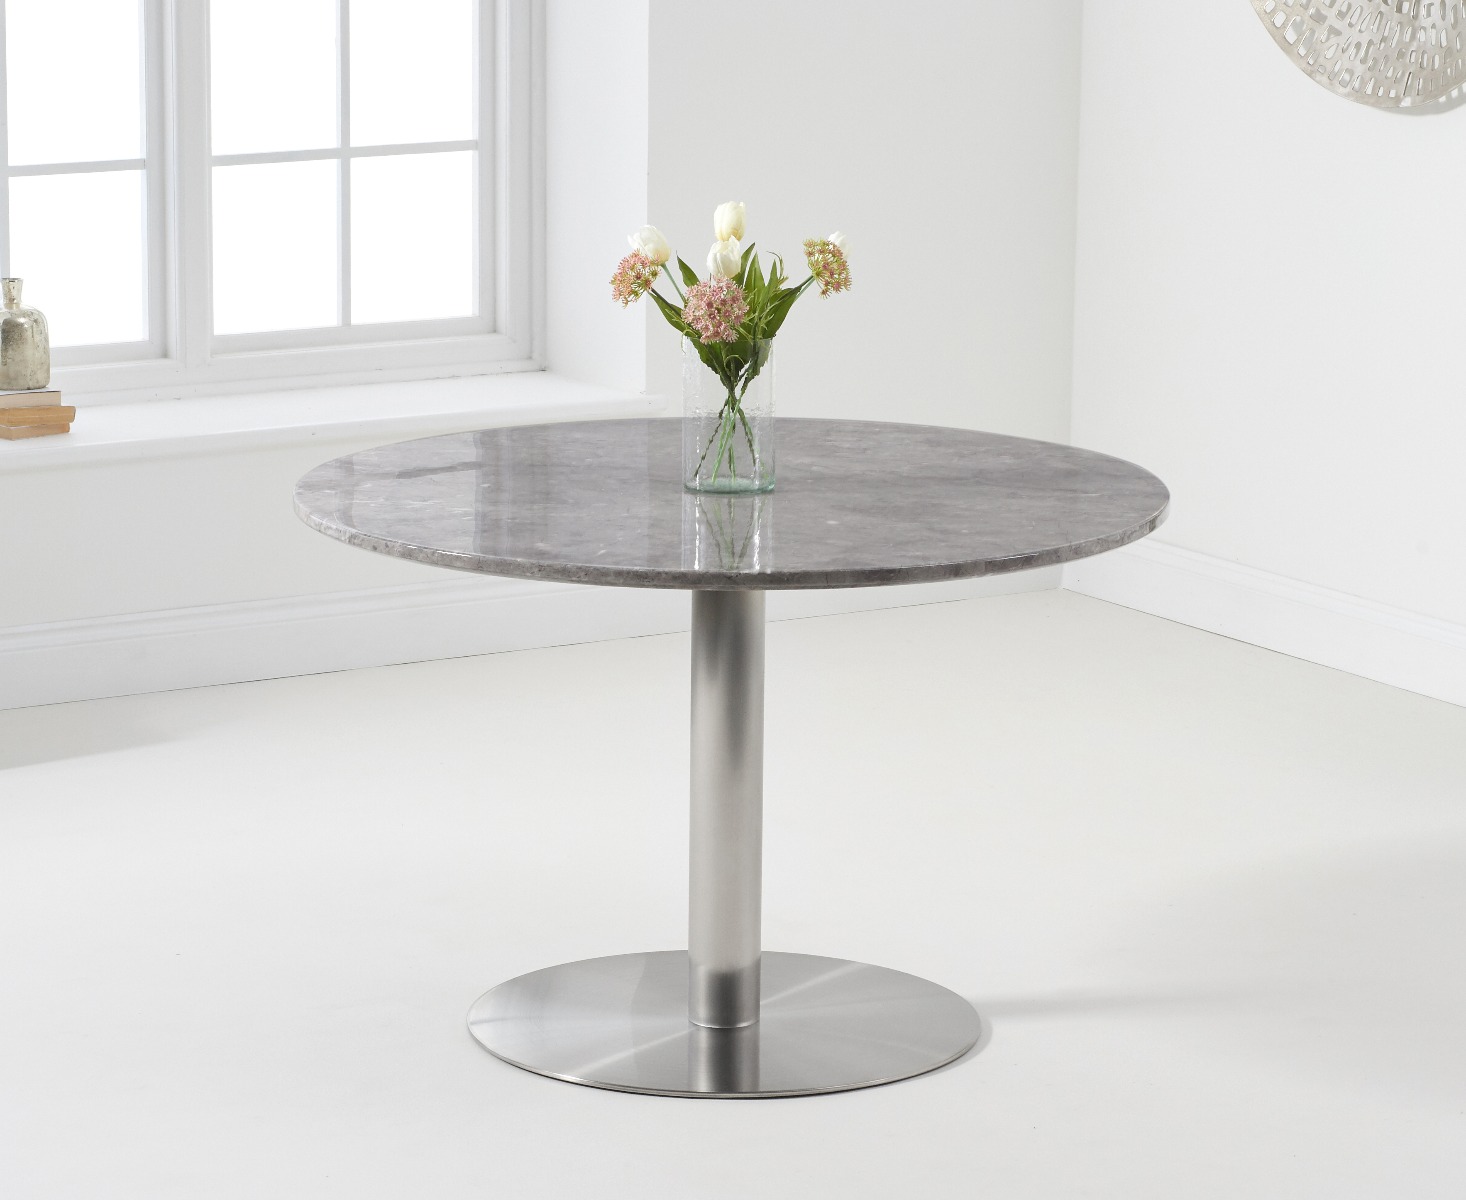 Bali 120cm Round Marble Effect Grey Dining Table